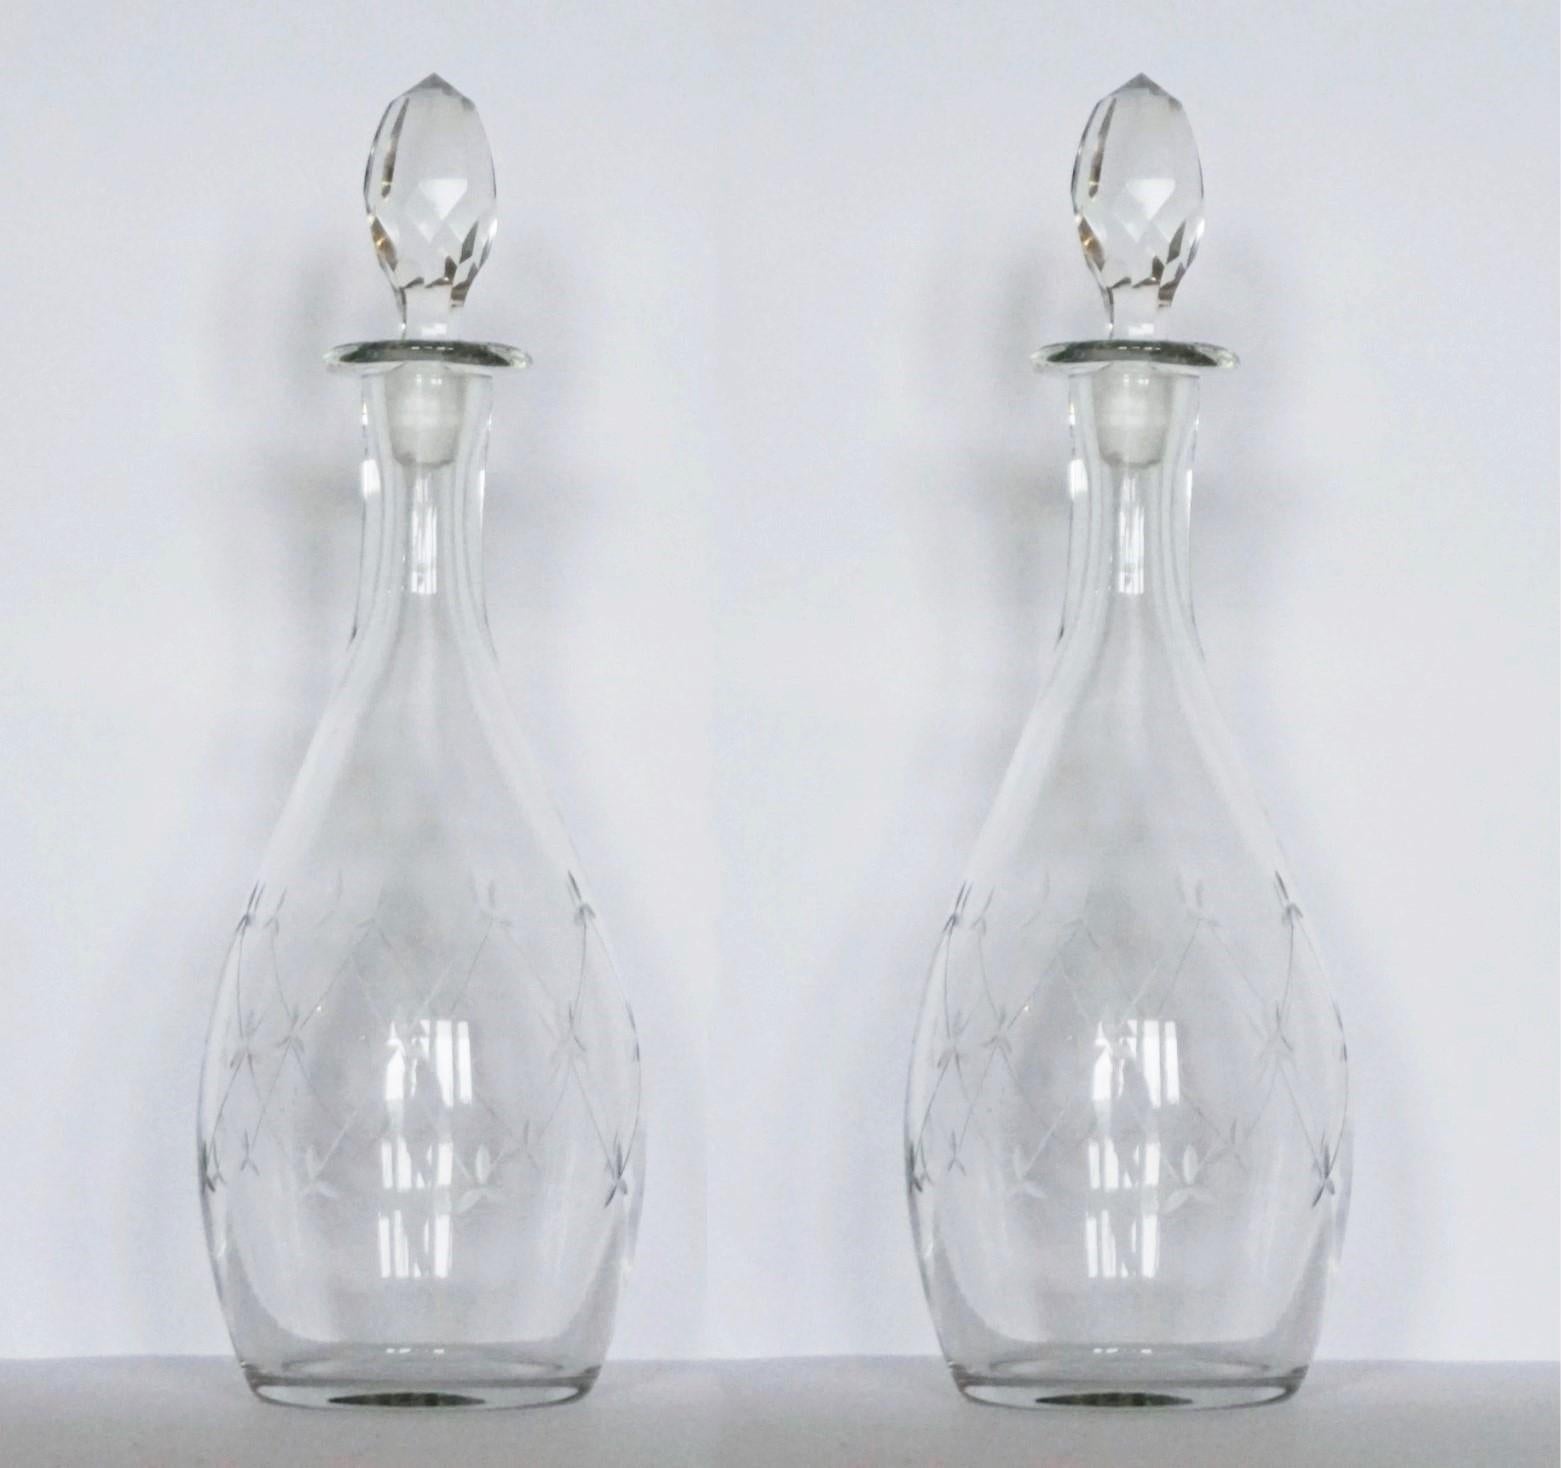 A fine pair of Victorian blown crystal tapered decanters or carafes finely hand-cut with elegant motivs, with its original hand-faceted rock crystal tall stoppers, England, circa 1860-1870. Both decanters in very good condition, no chips or cracks,